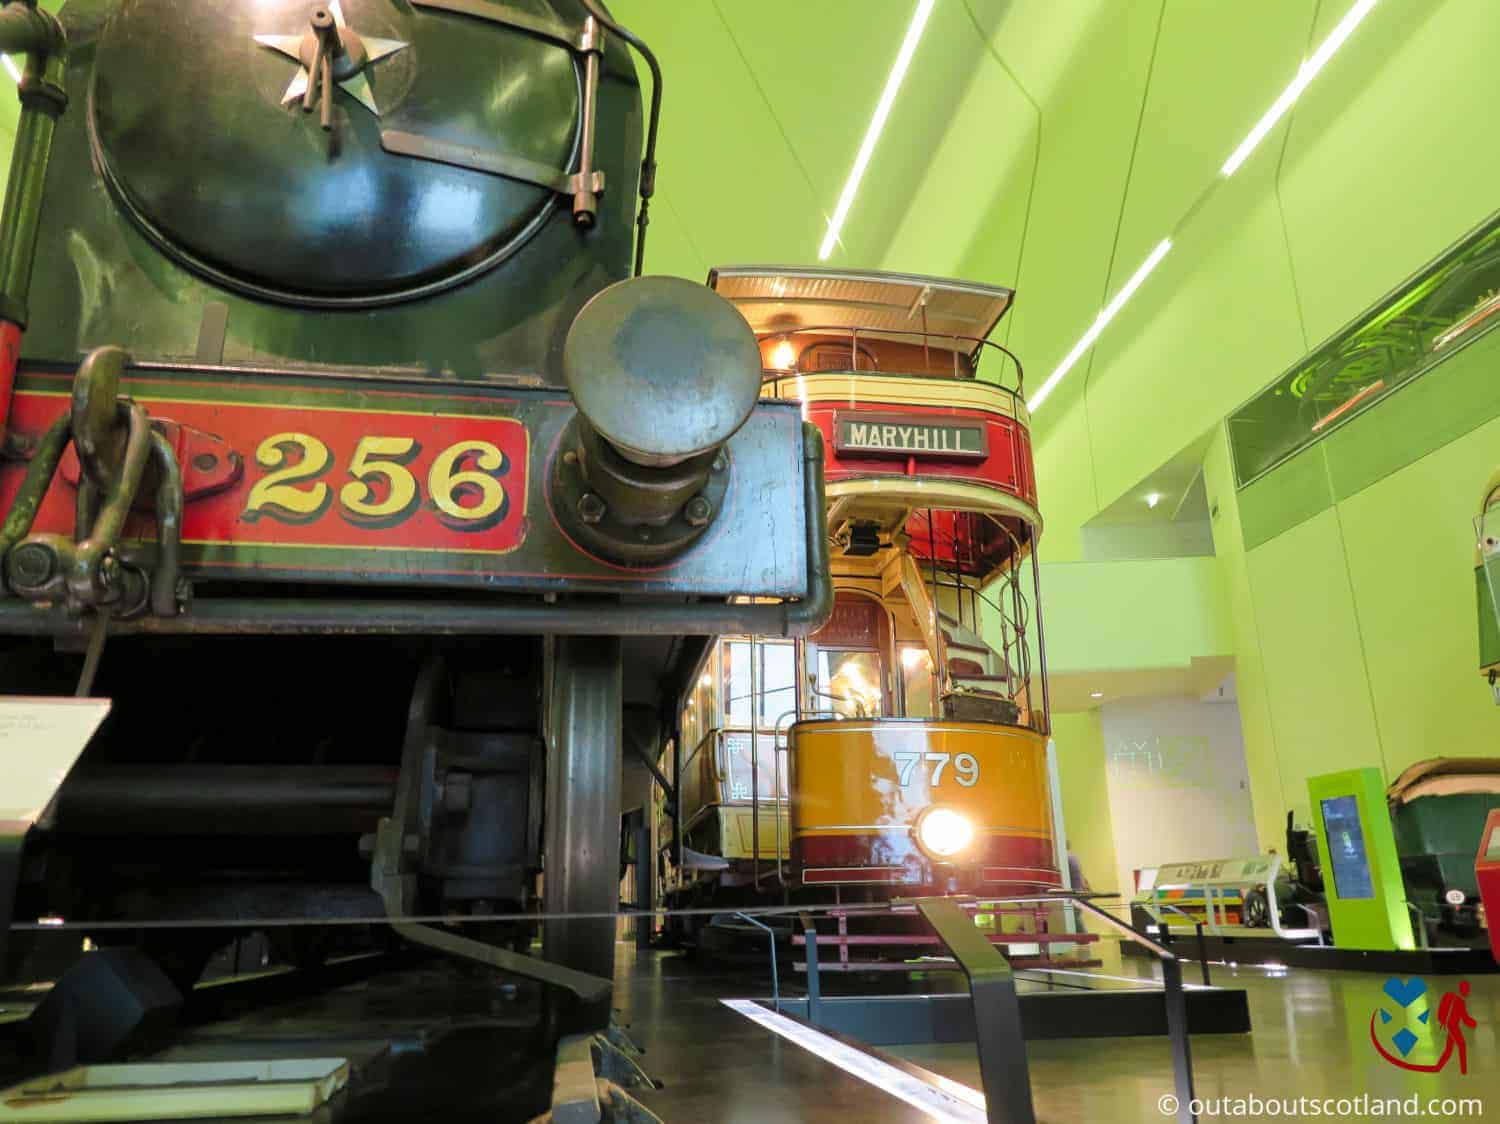 The Riverside Museum of Transport